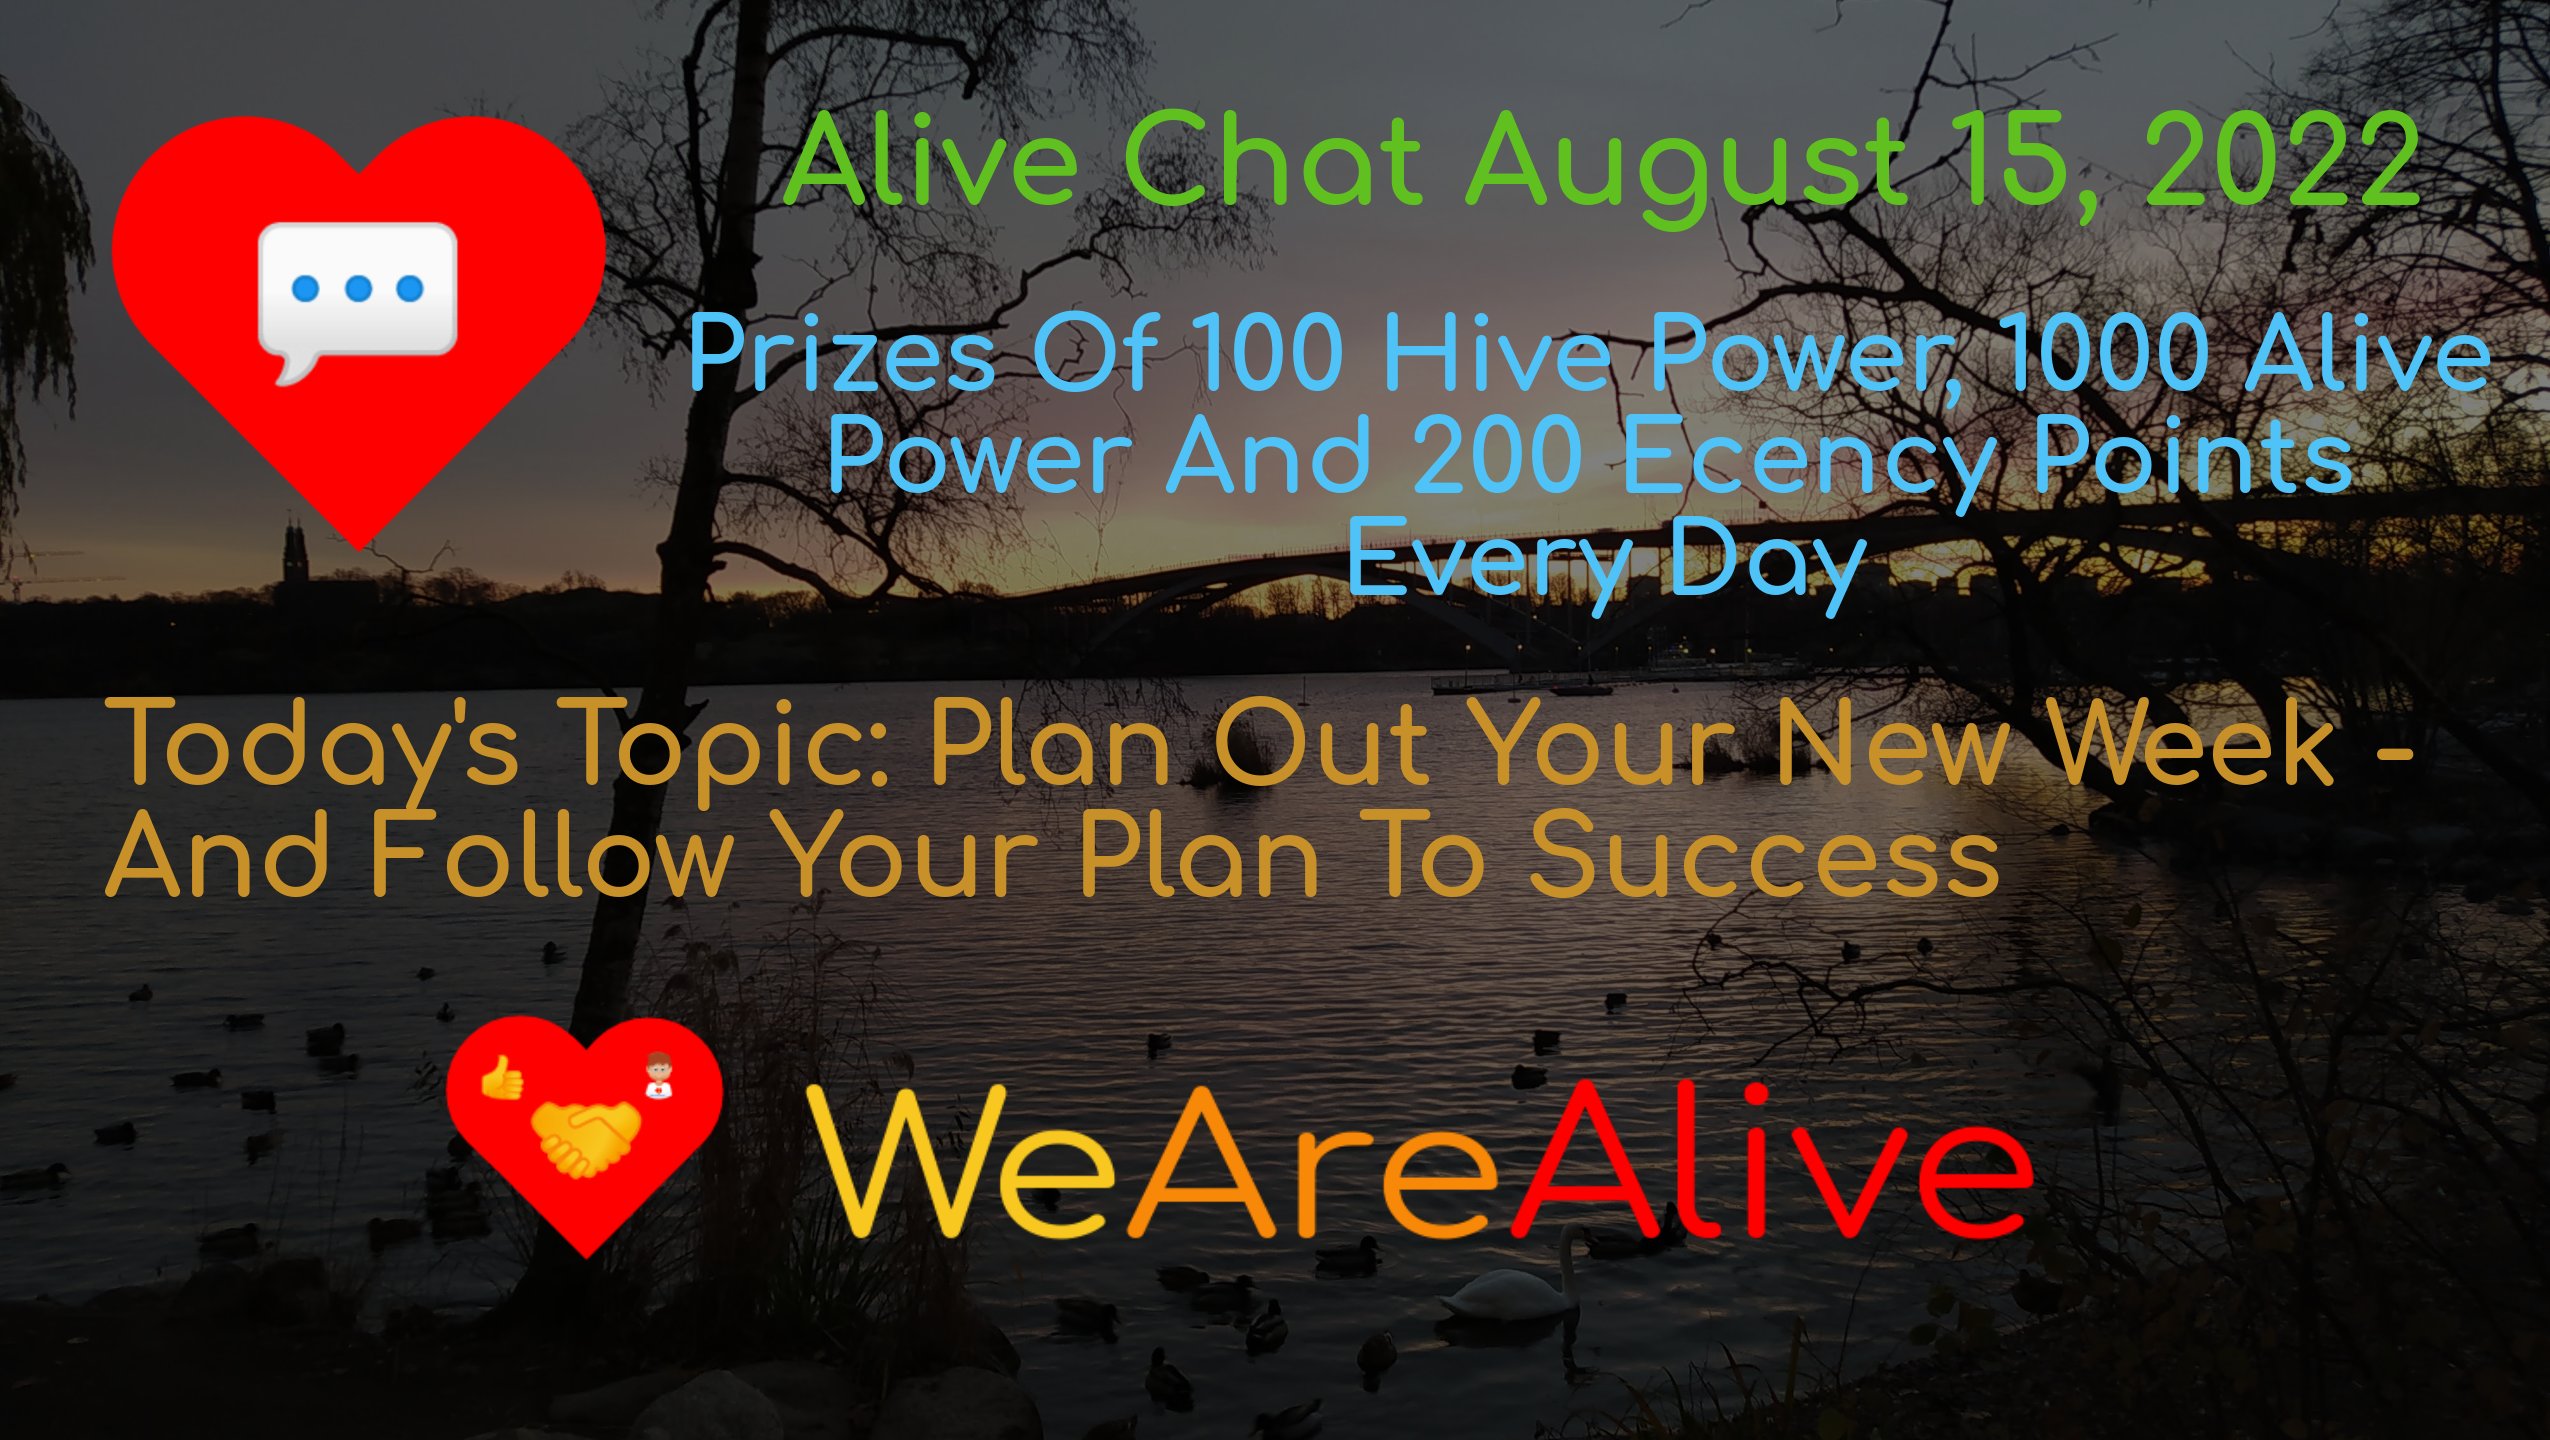 @alive.chat/alive-chat-august-15-2022-daily-prize-drawing-open-for-entries-todays-topic-plan-out-your-new-week-and-follow-your-plan-to-suc